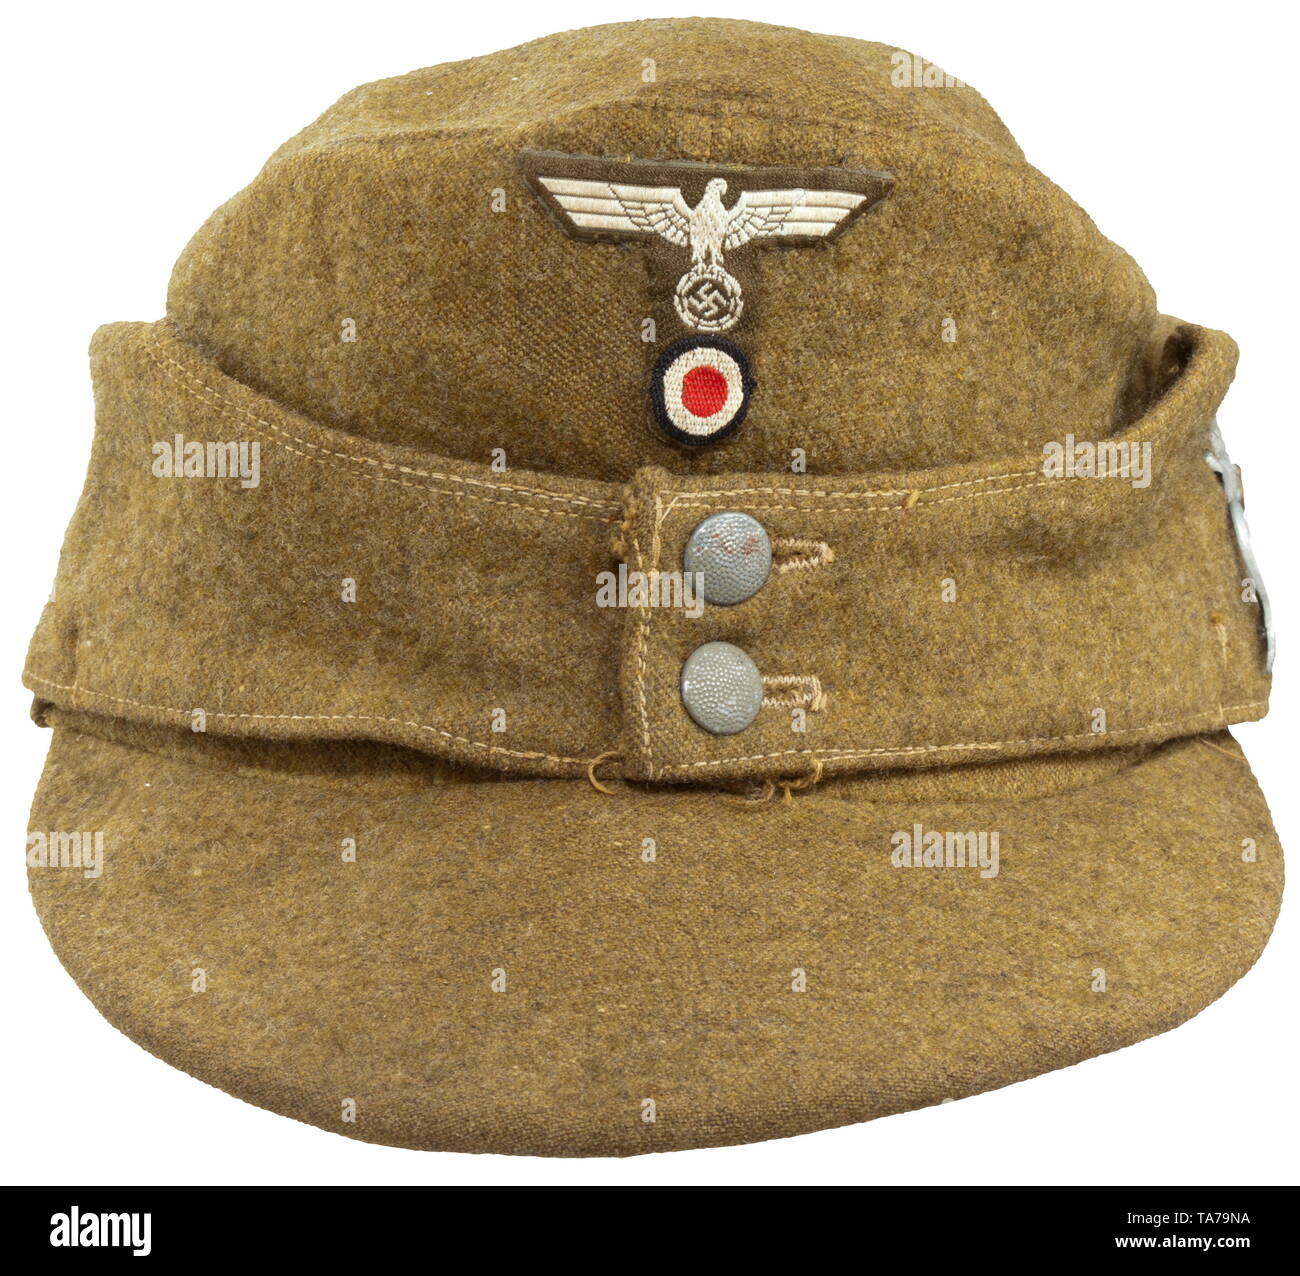 A mountain cap for members of the Organisation Todt within the mountain service Kammerstück aus khakifarbenem Wolltuch, goldbraunes Innenfutter, BeVo-gewebter T-Adler auf braunem Grund, Metall-Edelweiß. historic, historical, State, state-controled, state-run, organisations, organizations, organization, organisation, object, objects, stills, clipping, clippings, cut out, cut-out, cut-outs, utensil, piece of equipment, utensils, 20th century, Additional-Rights-Clearance-Info-Not-Available Stock Photo